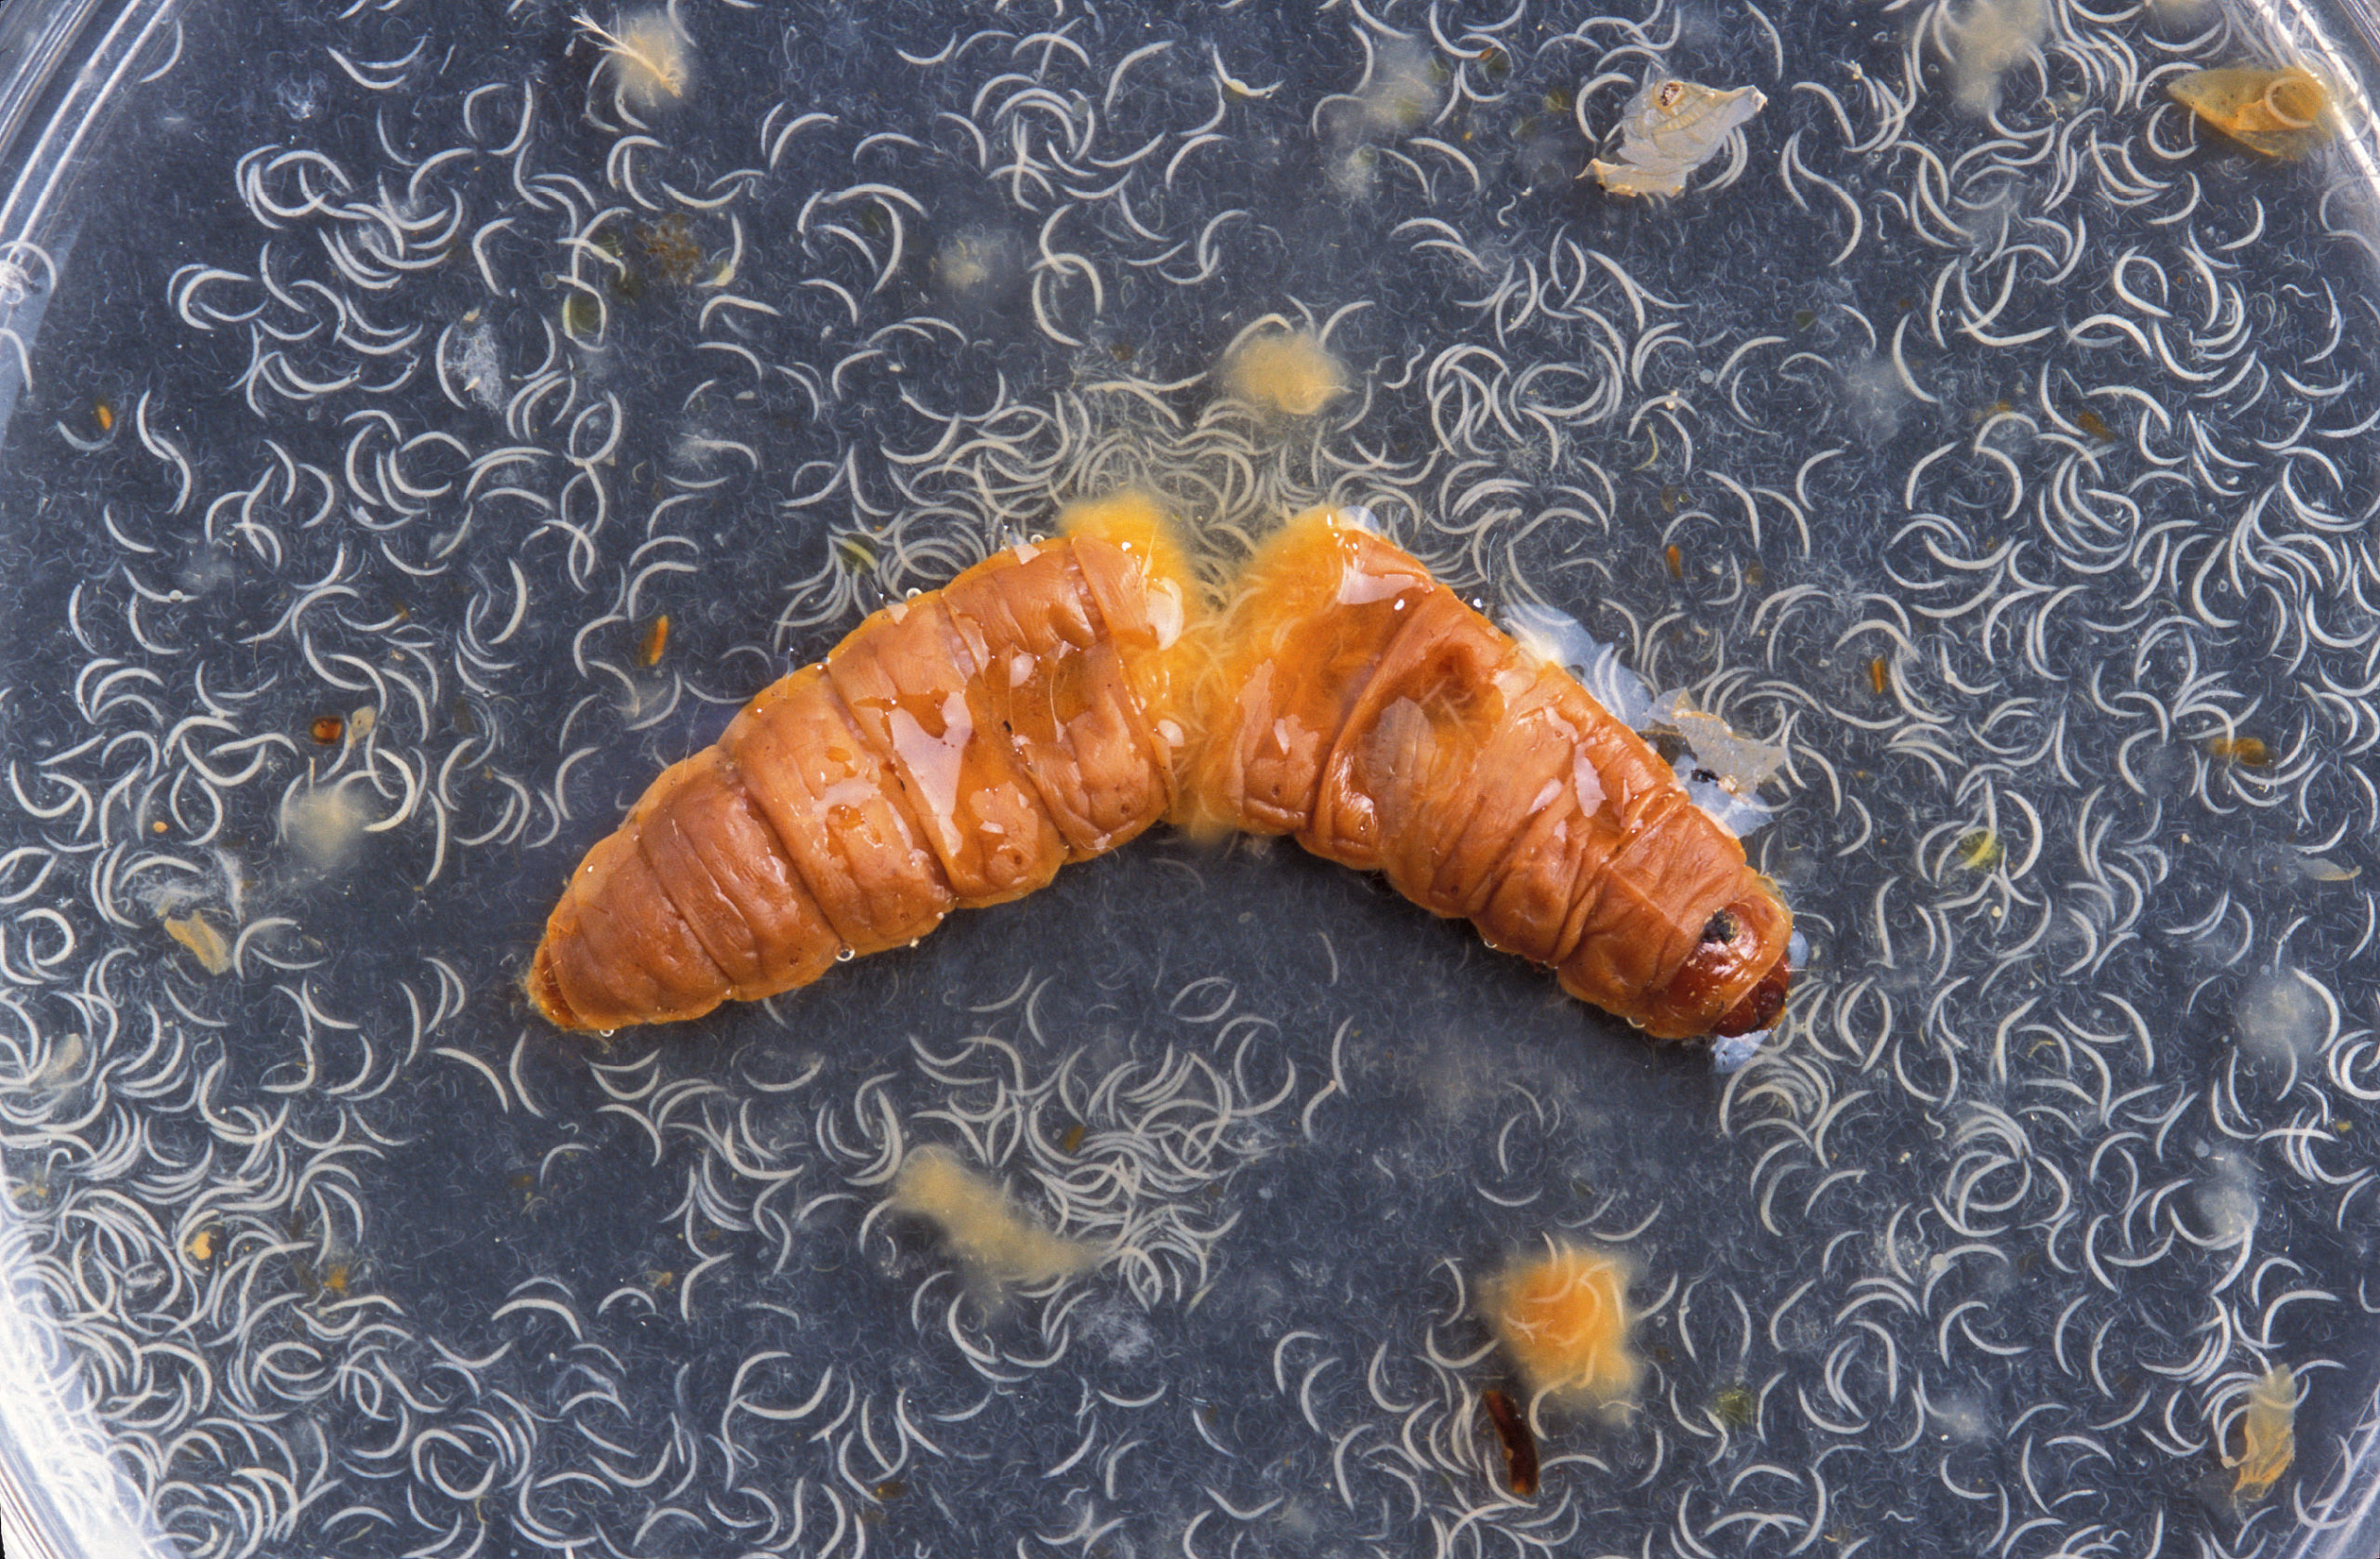 An up-close view of nematodes emerging from an infected wax moth larva. The wax moth larva is orange, thick, and rounded like a worm. It is split in the half and that's where the nematodes are emerging from in a petri dish. The nematodes are white half-moon slivers.